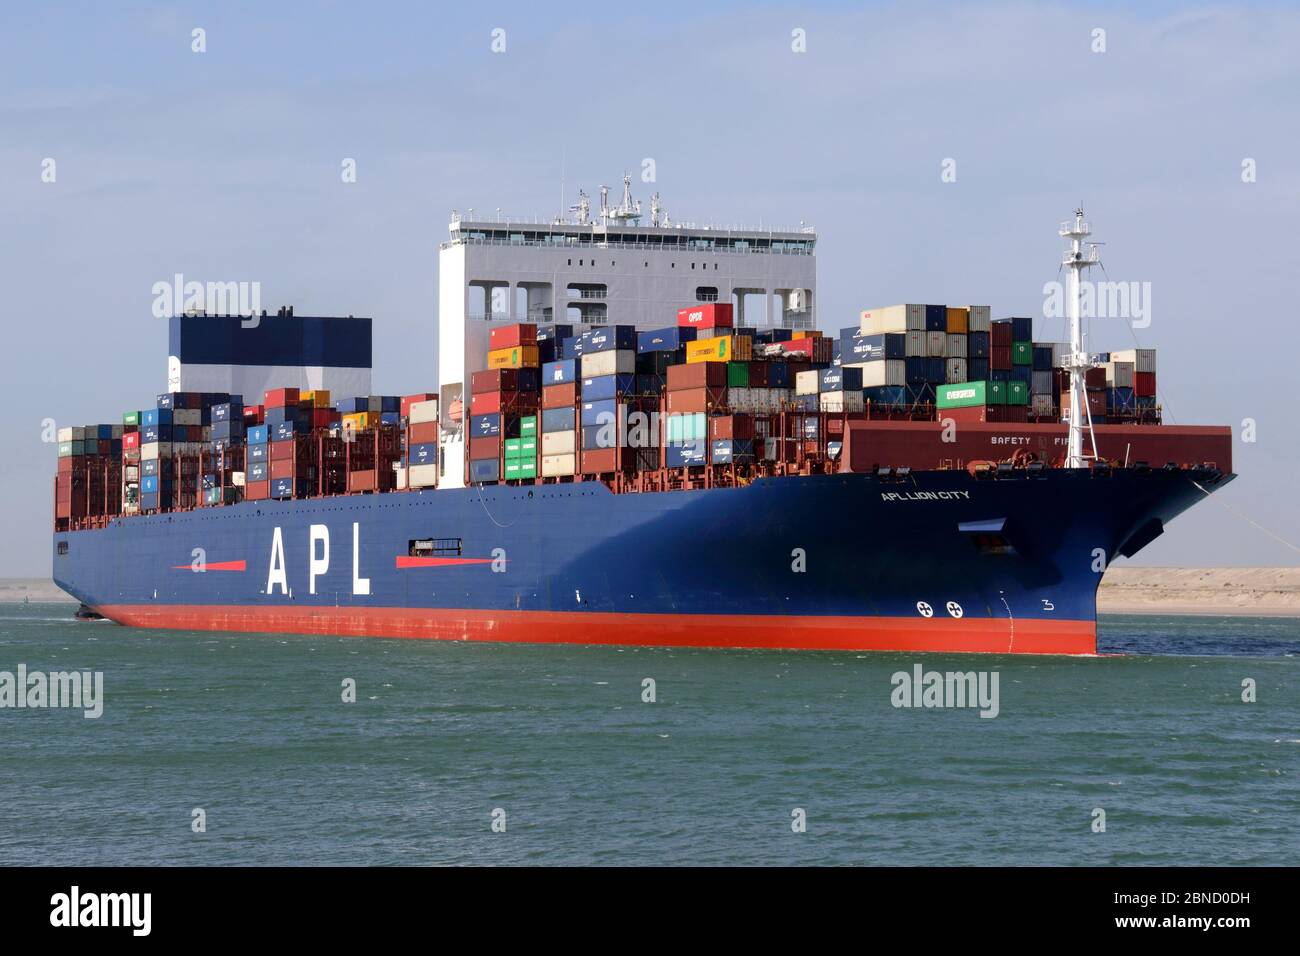 The container ship APL Lion City will leave the port of Rotterdam on March 12, 2020. Stock Photo